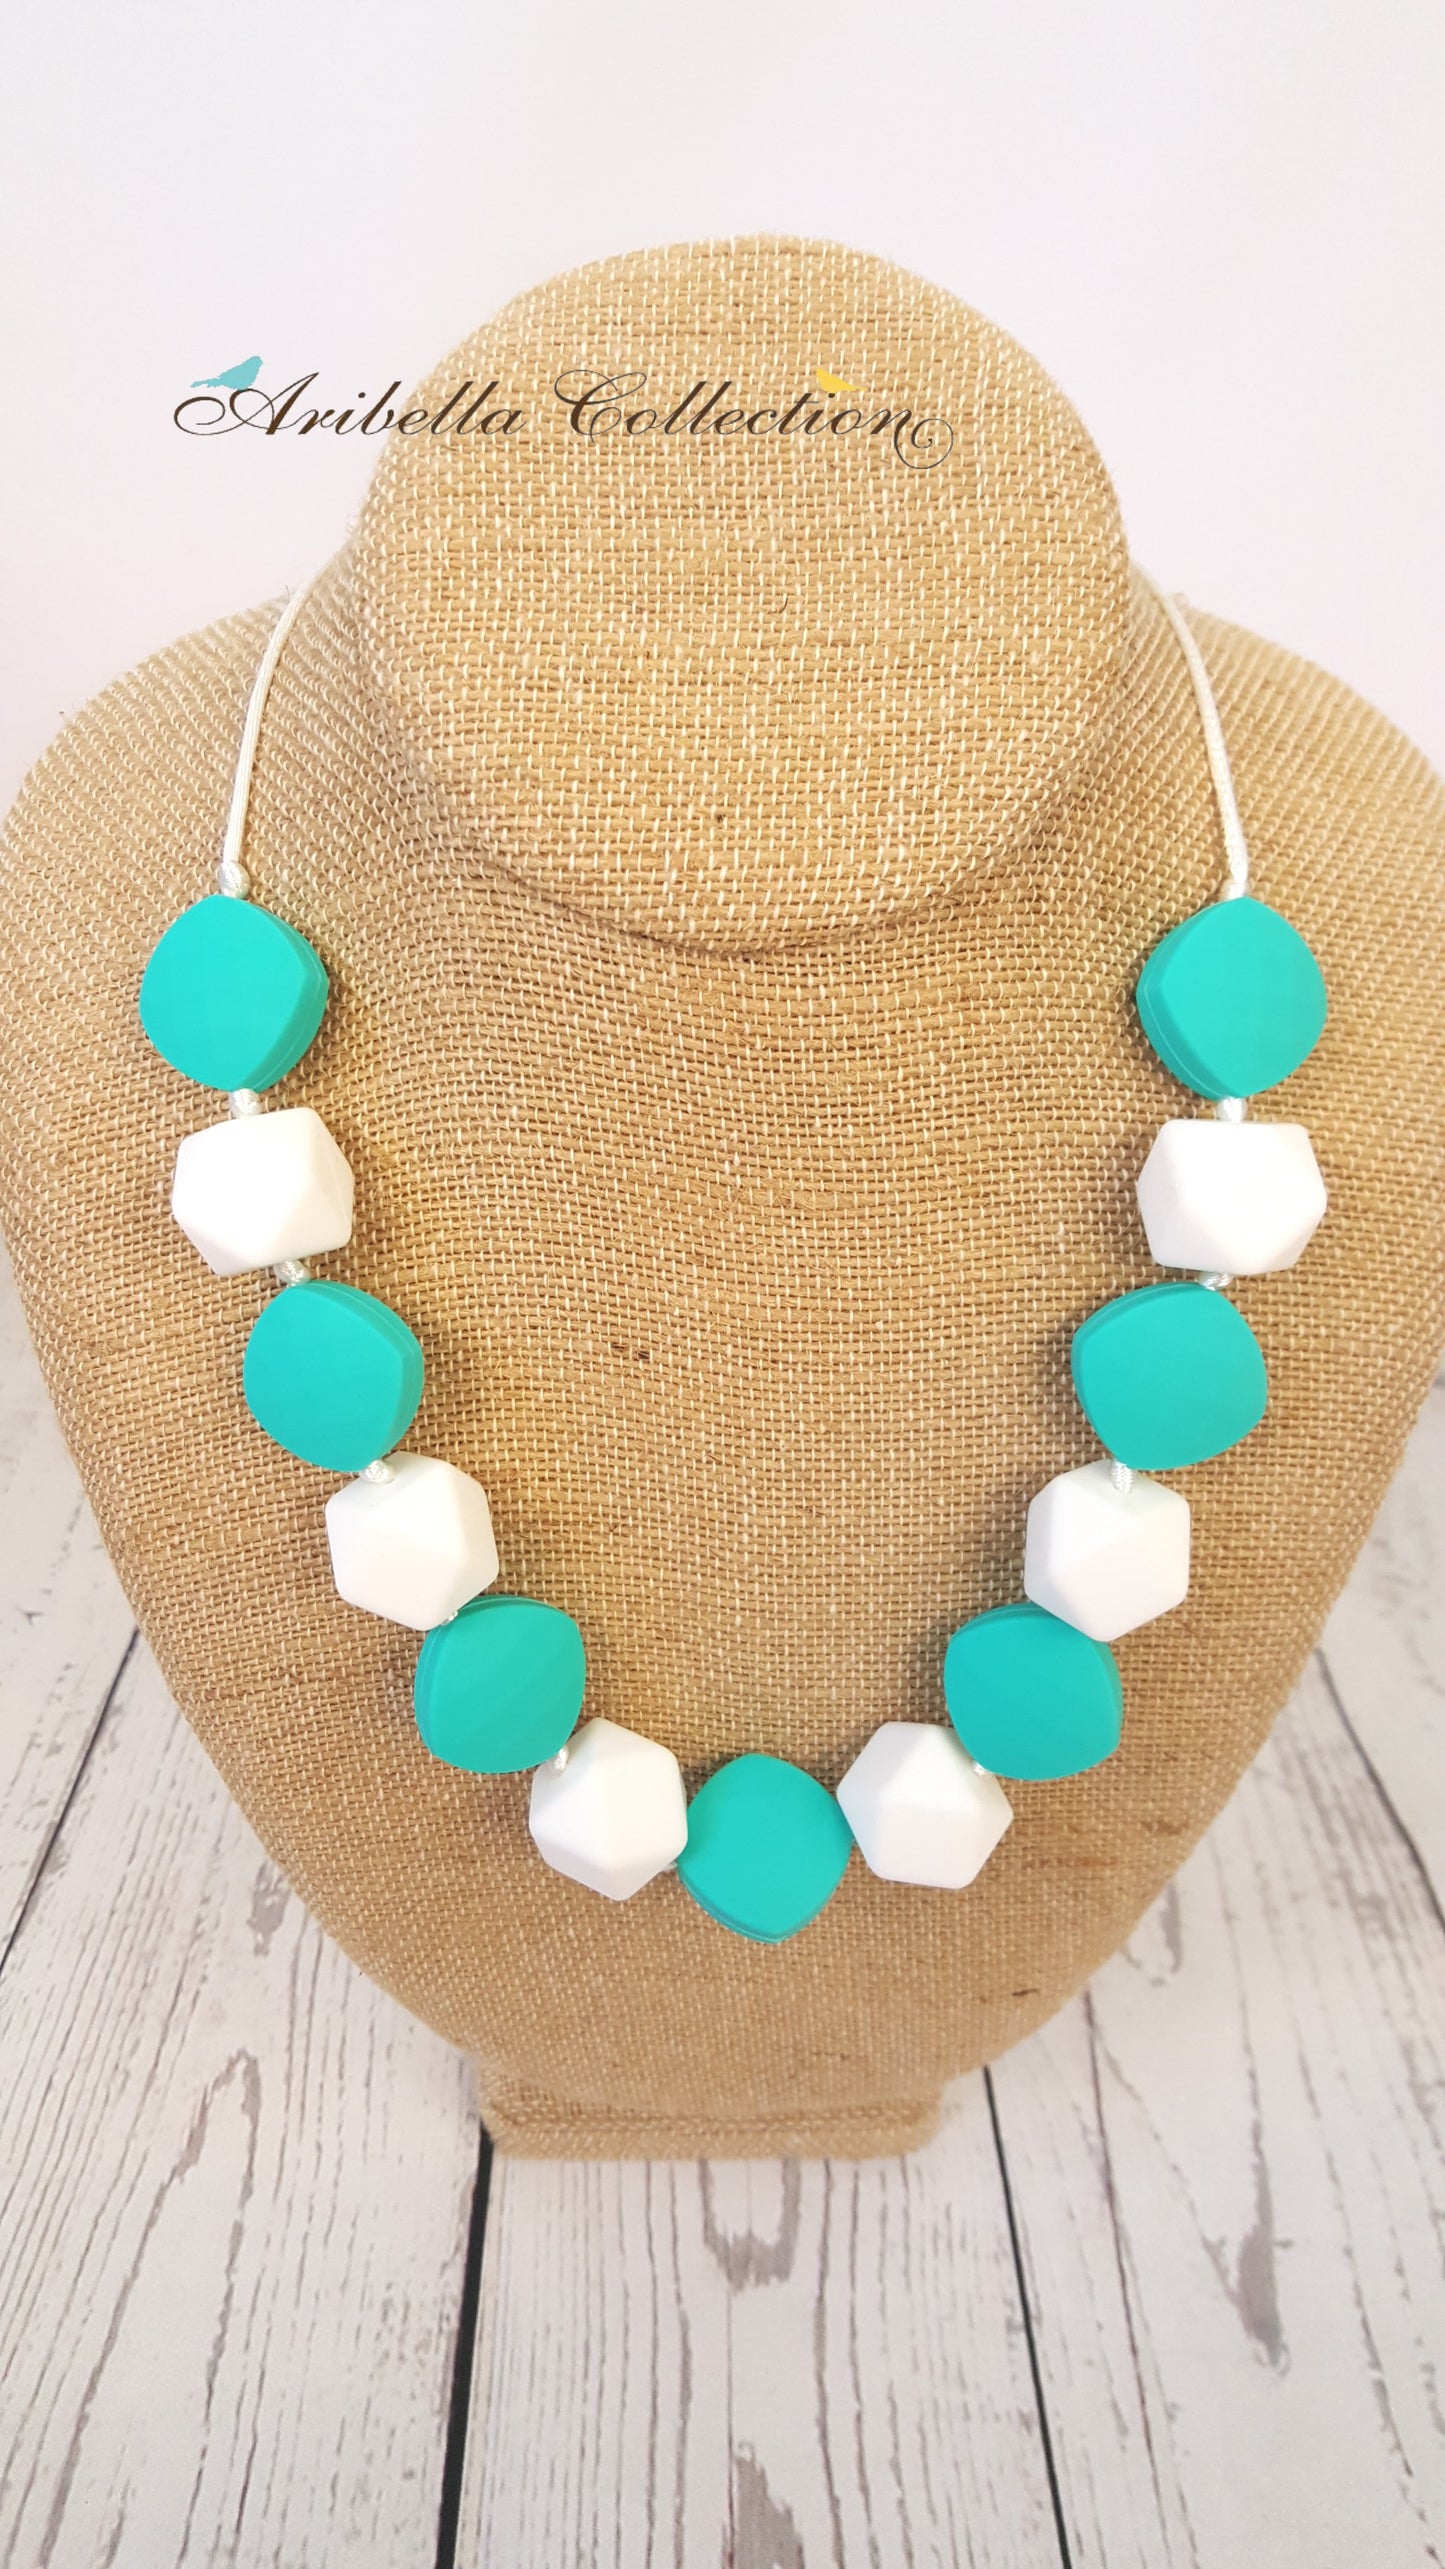 Silicone Necklace - Turquoise/White - Aribella Collection, Inc.